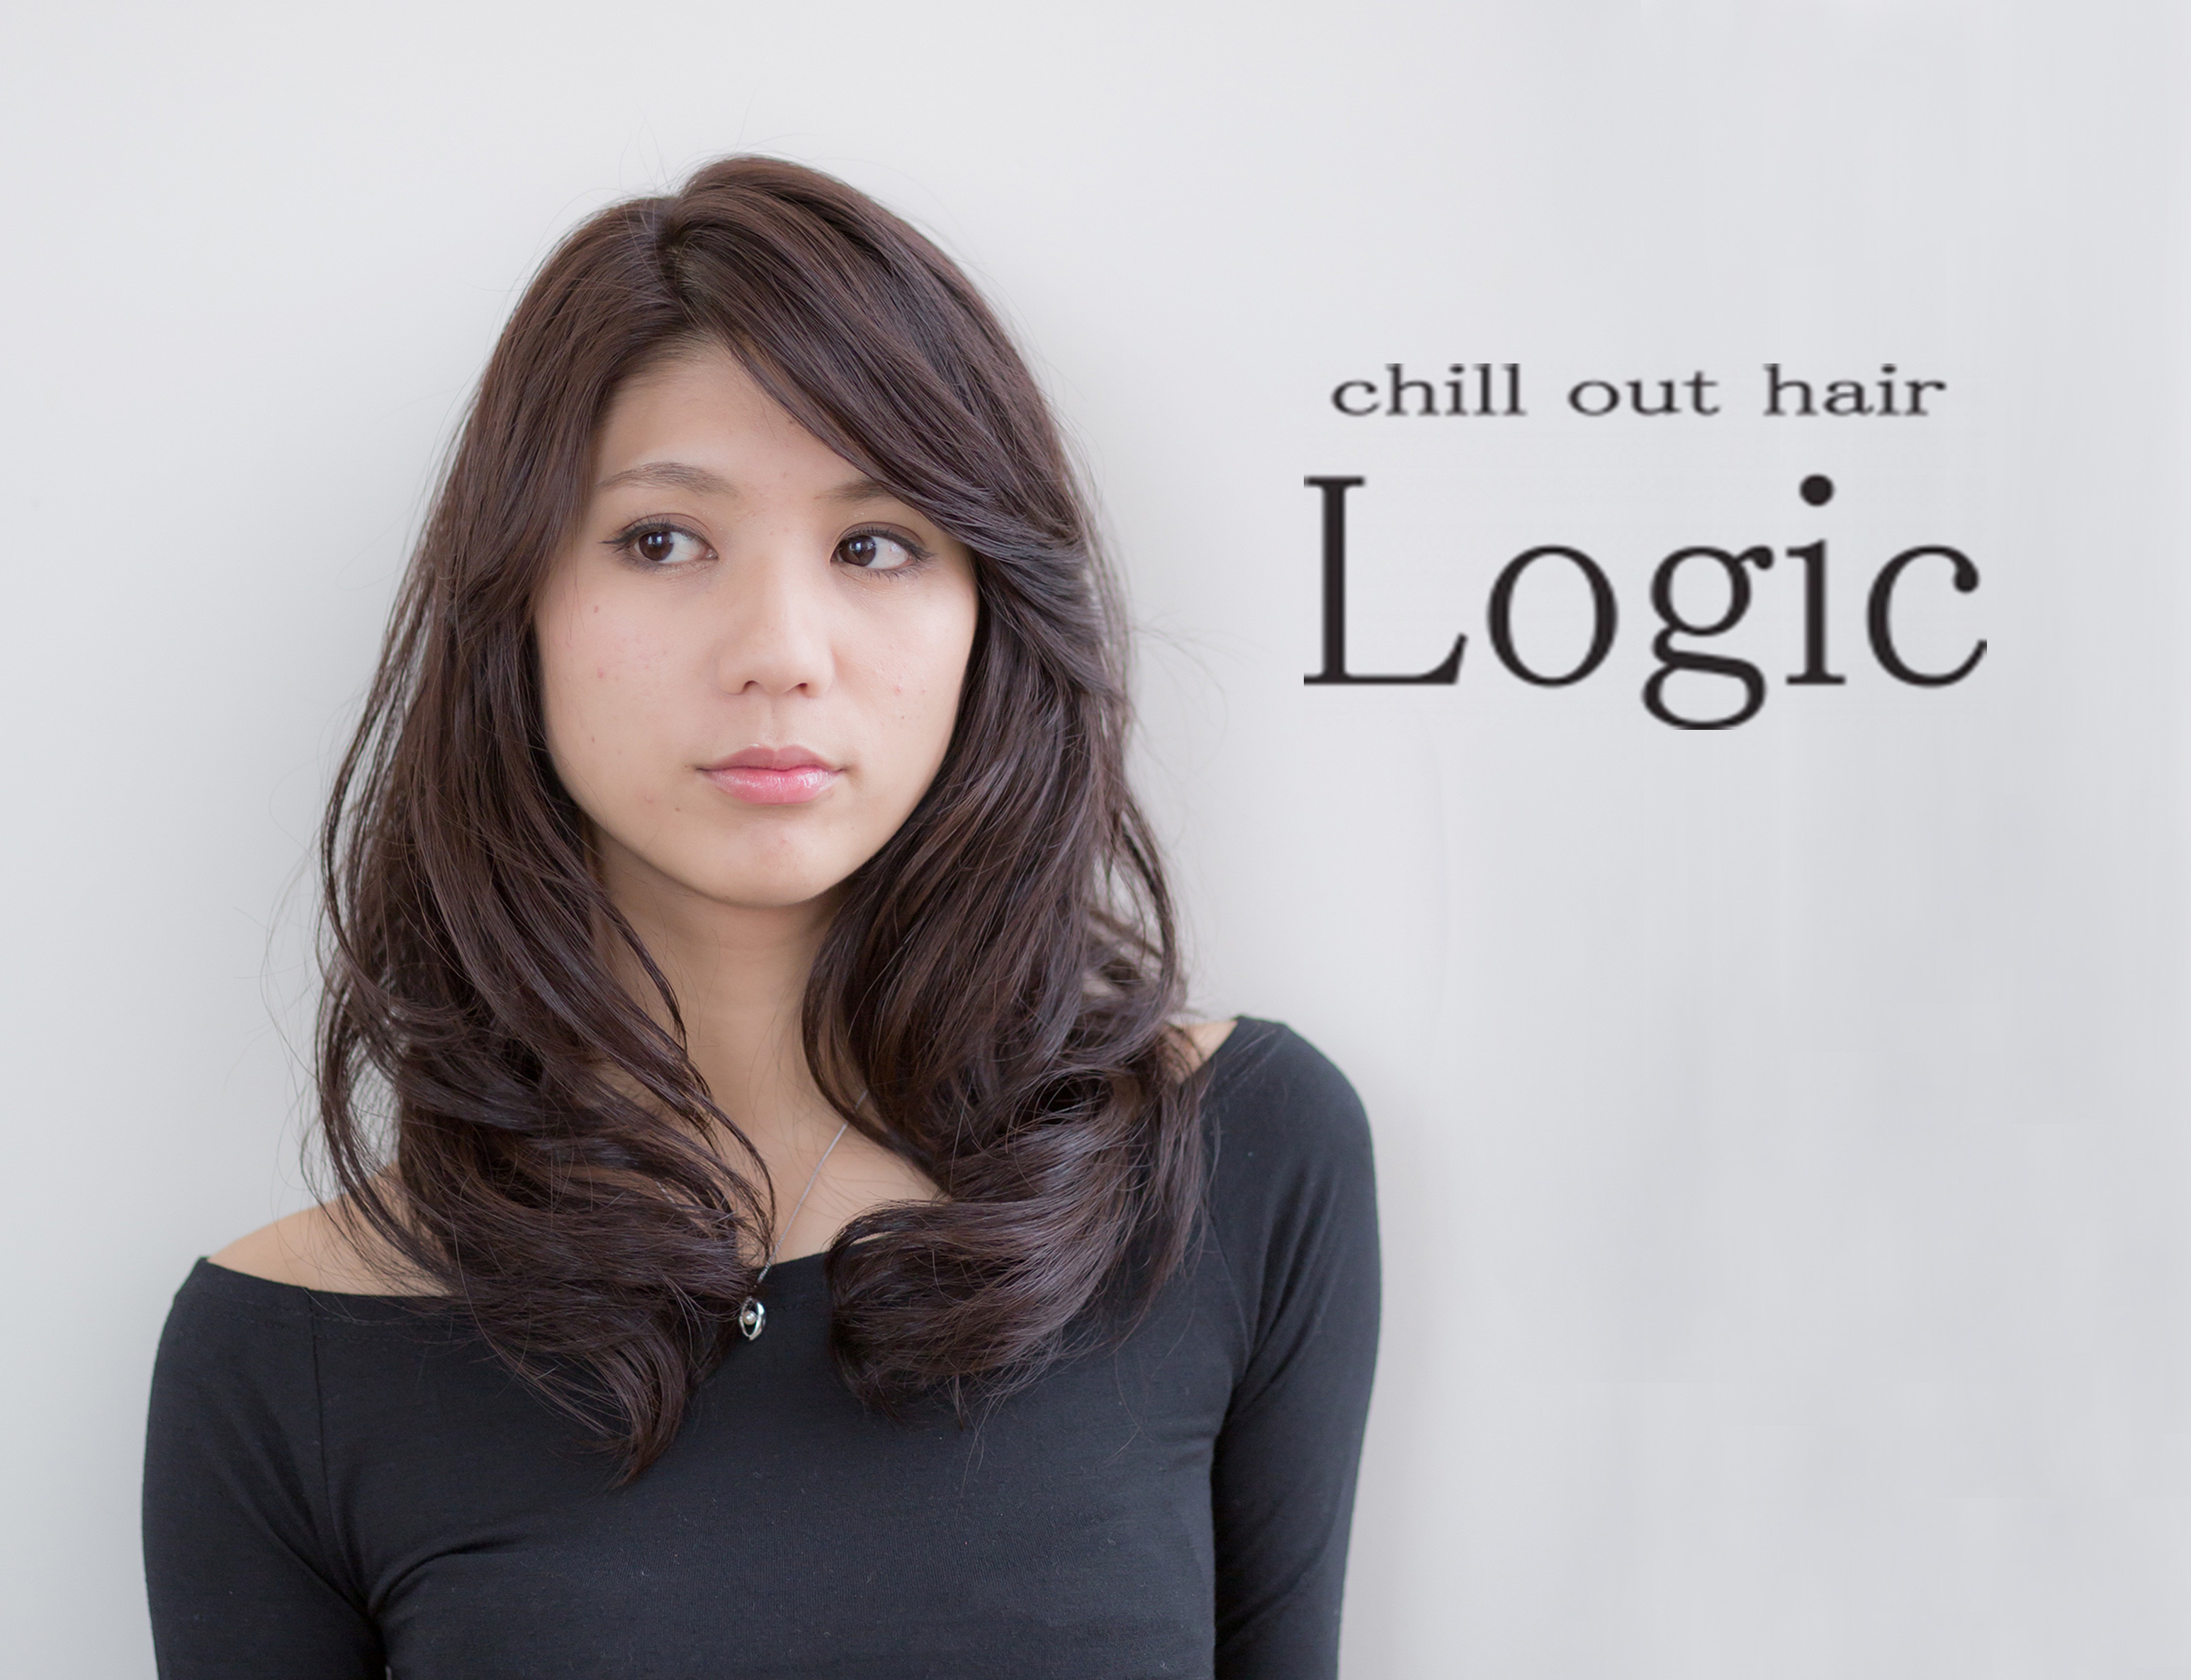 chill out hair Logicのアイキャッチ画像